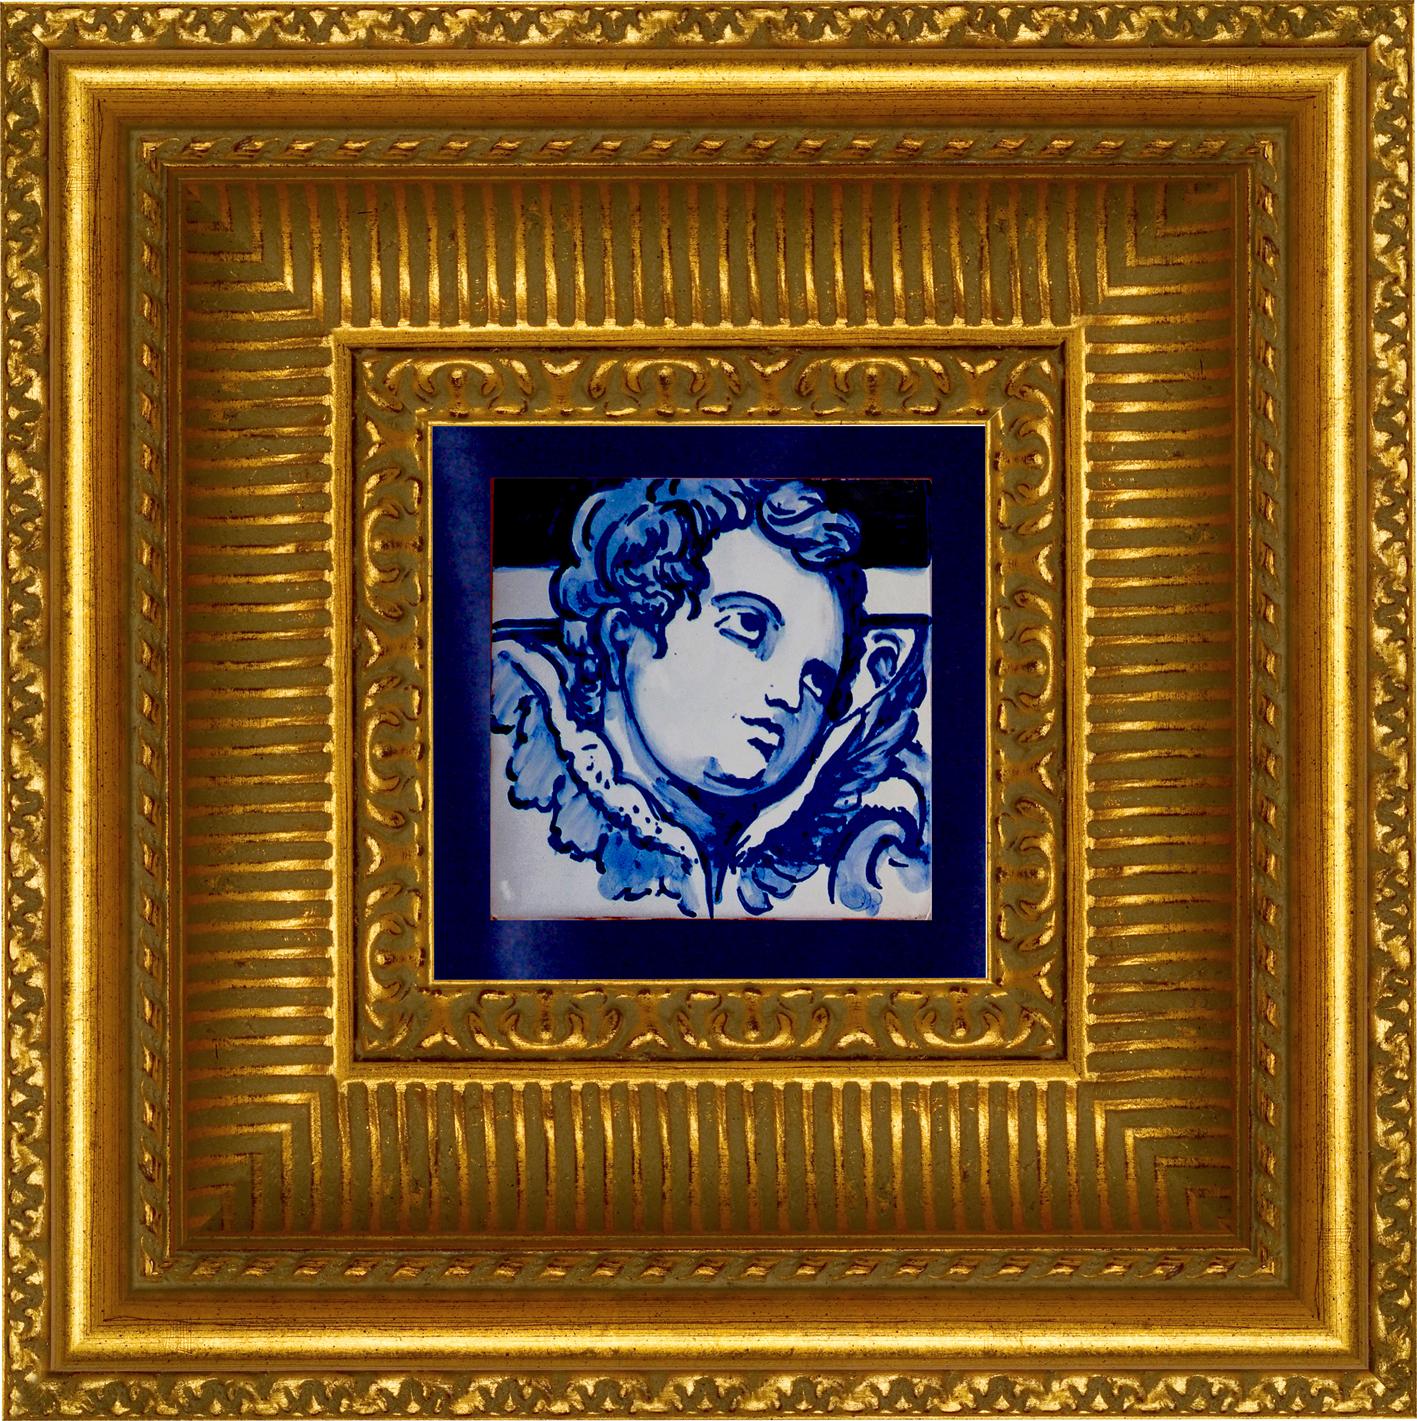 Gorgeous blue hand painted Baroque cherub or angel 18th century style Portuguese ceramic tile/azulejo
the tile painted in cobalt blue over white in typical 18th century Portugal set the taste for monumental ceramic tile applications in churches and